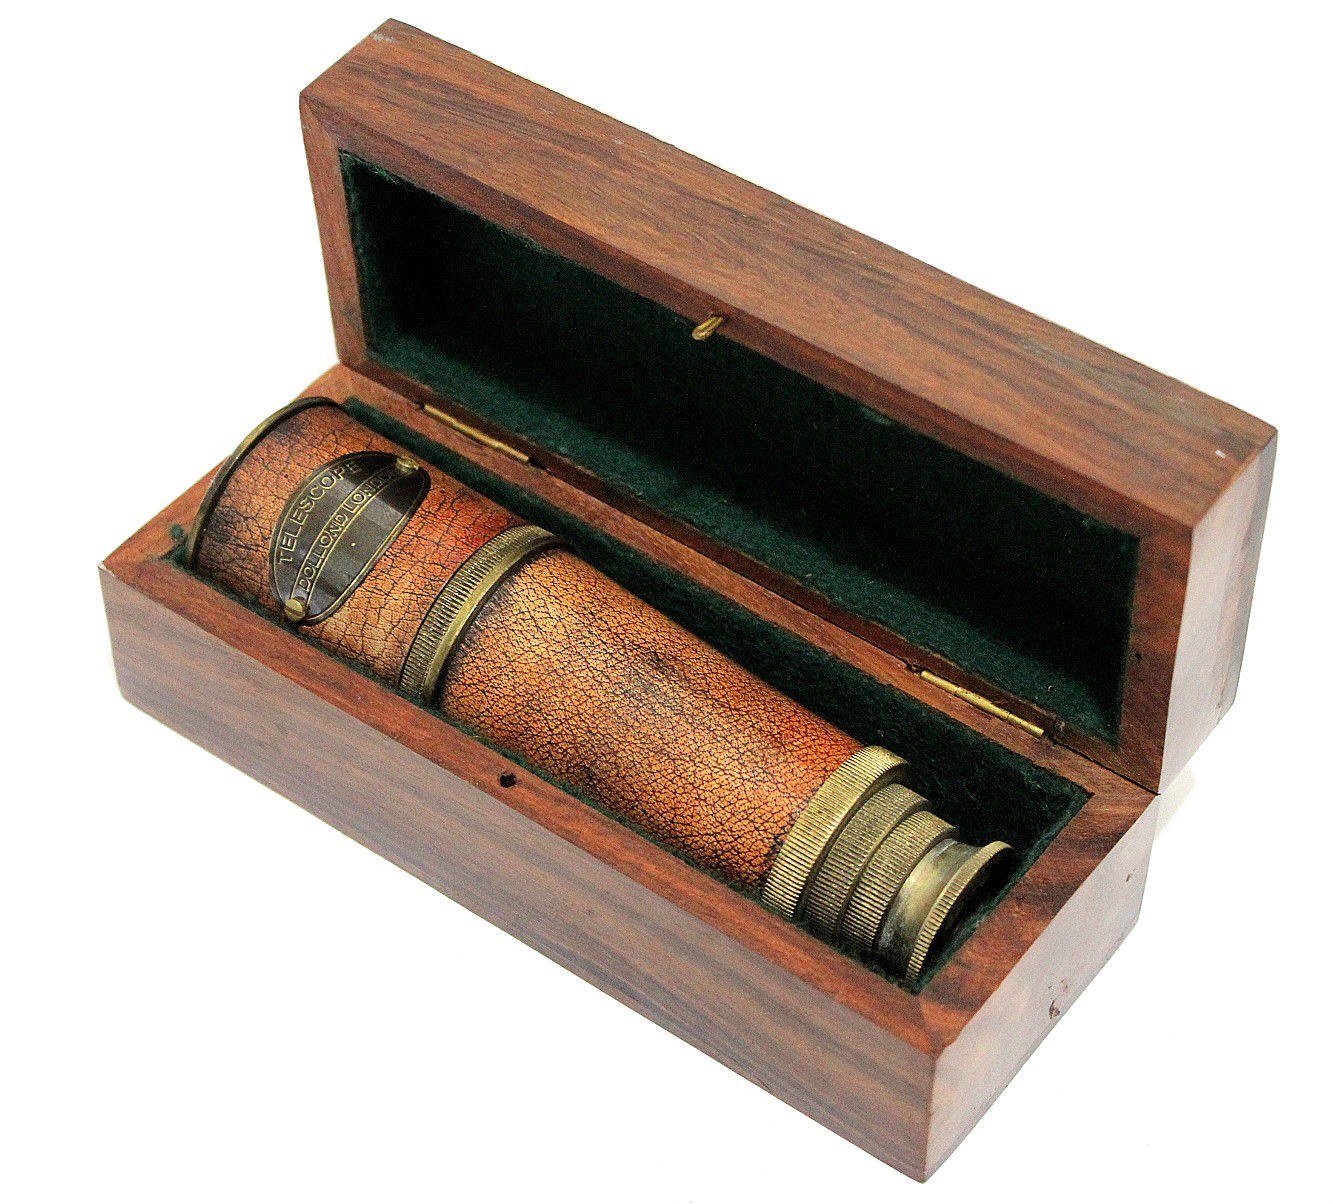 16 - Dollond London Spyglass Telescope Maker - Personalized with